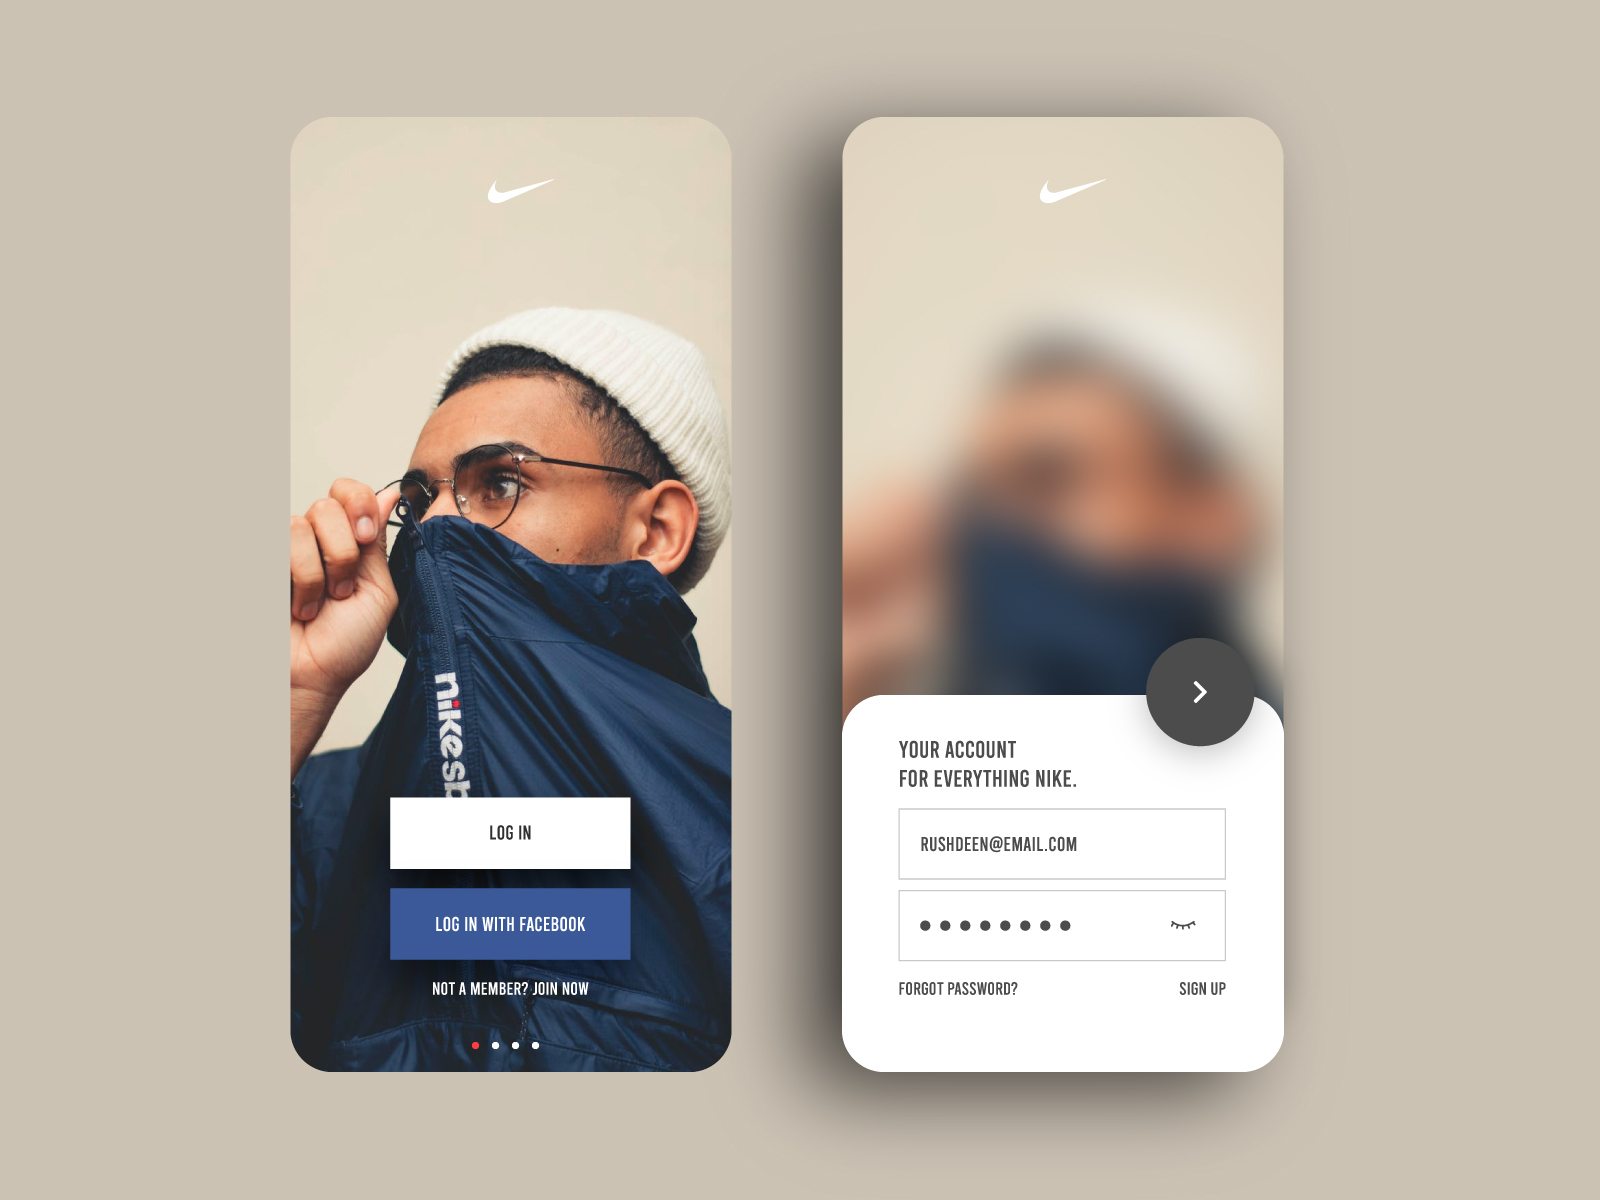 011 - Nike App Login Concept by 